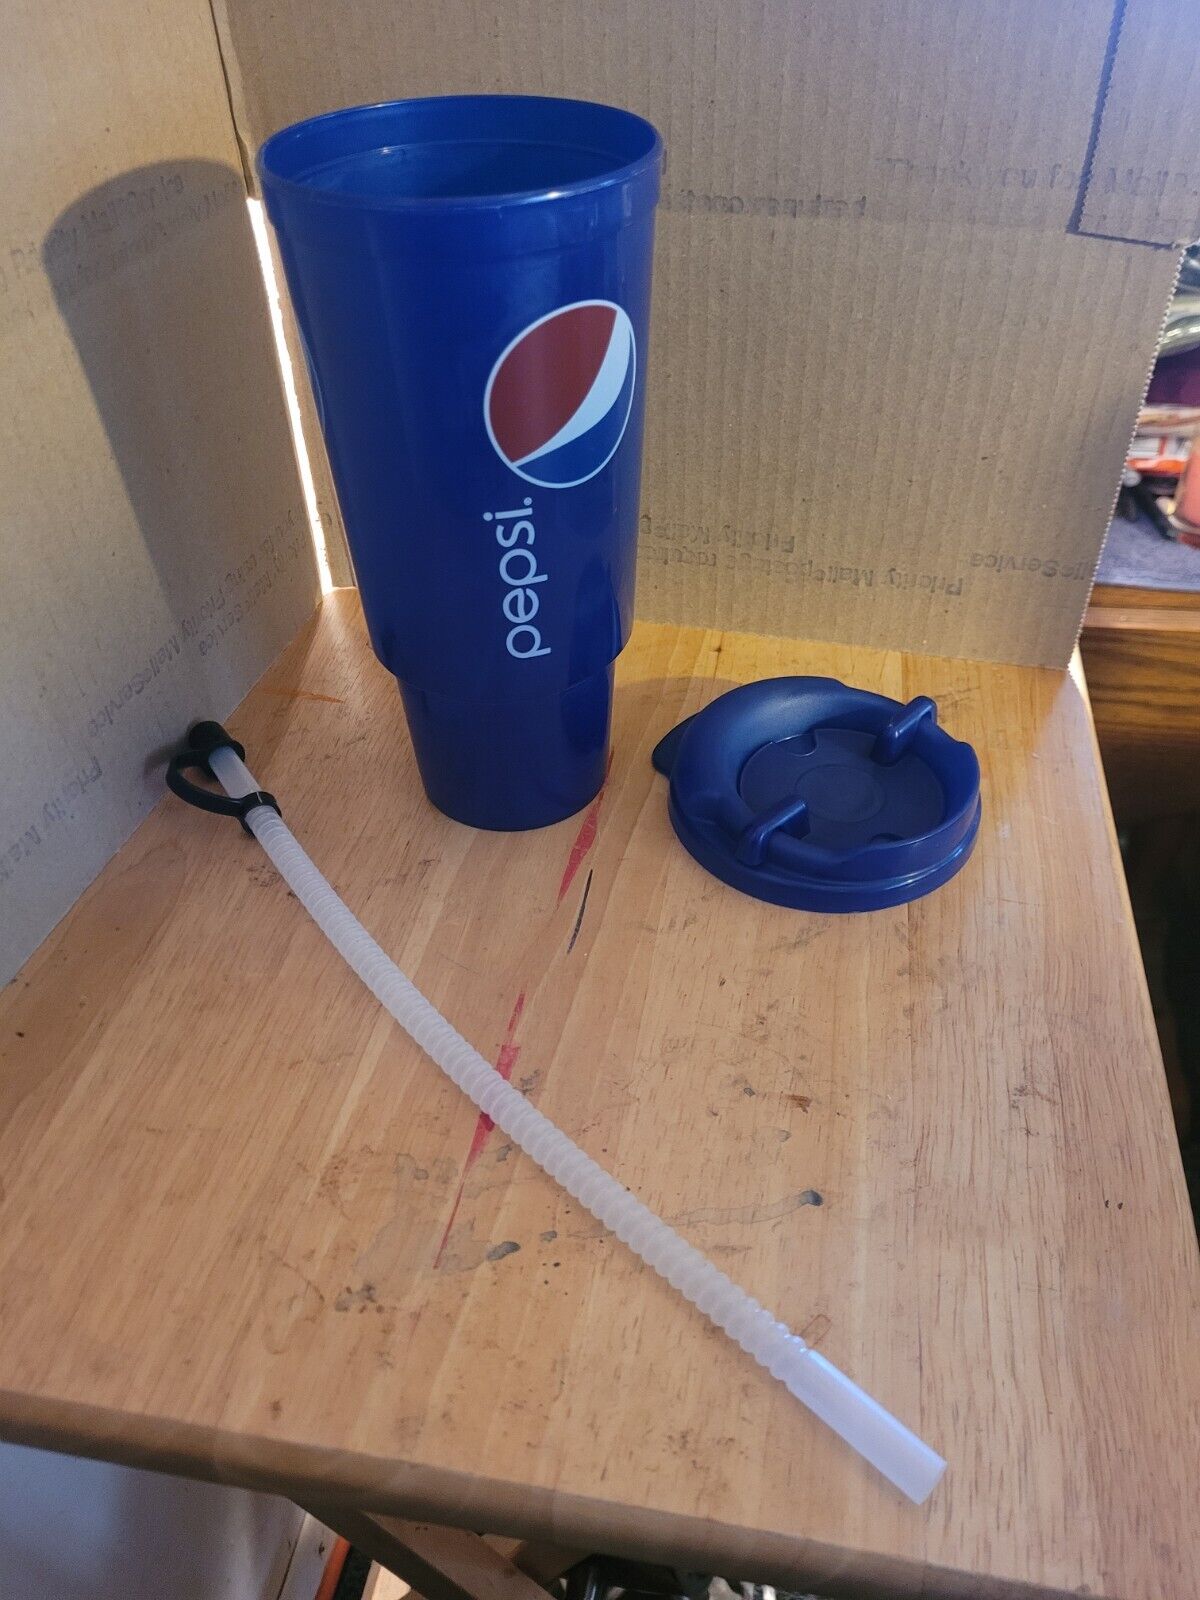 Whirley Blue Lid Pepsi Cola 32oz Plastic Dispenser Bottle Cup And Straw NEW